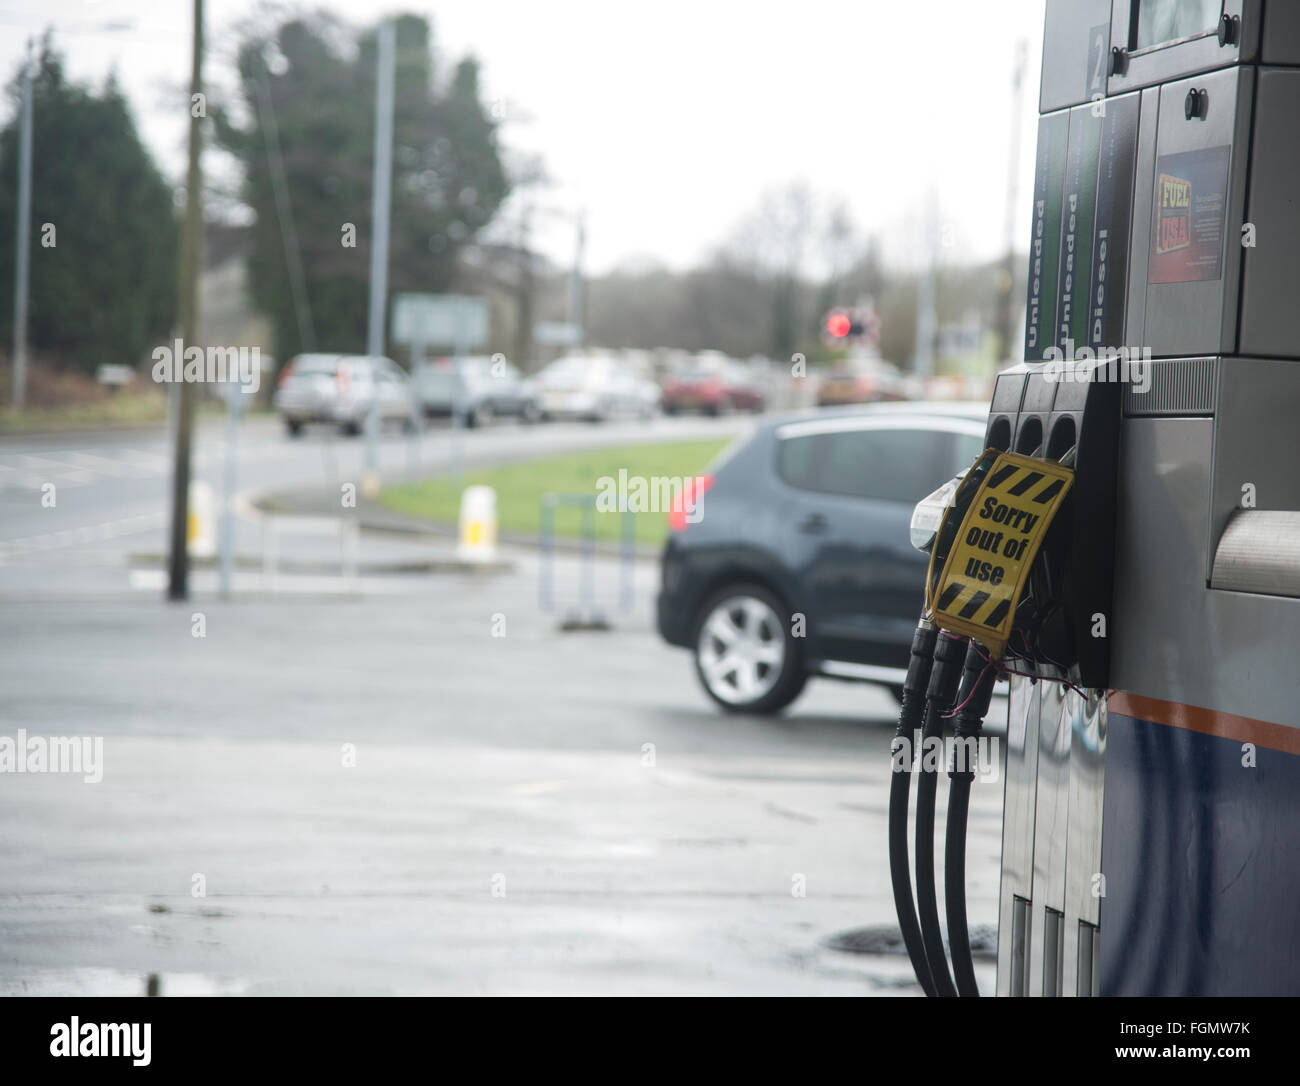 A sign 'sorry out of use' displayed on fuel pumps. Stock Photo